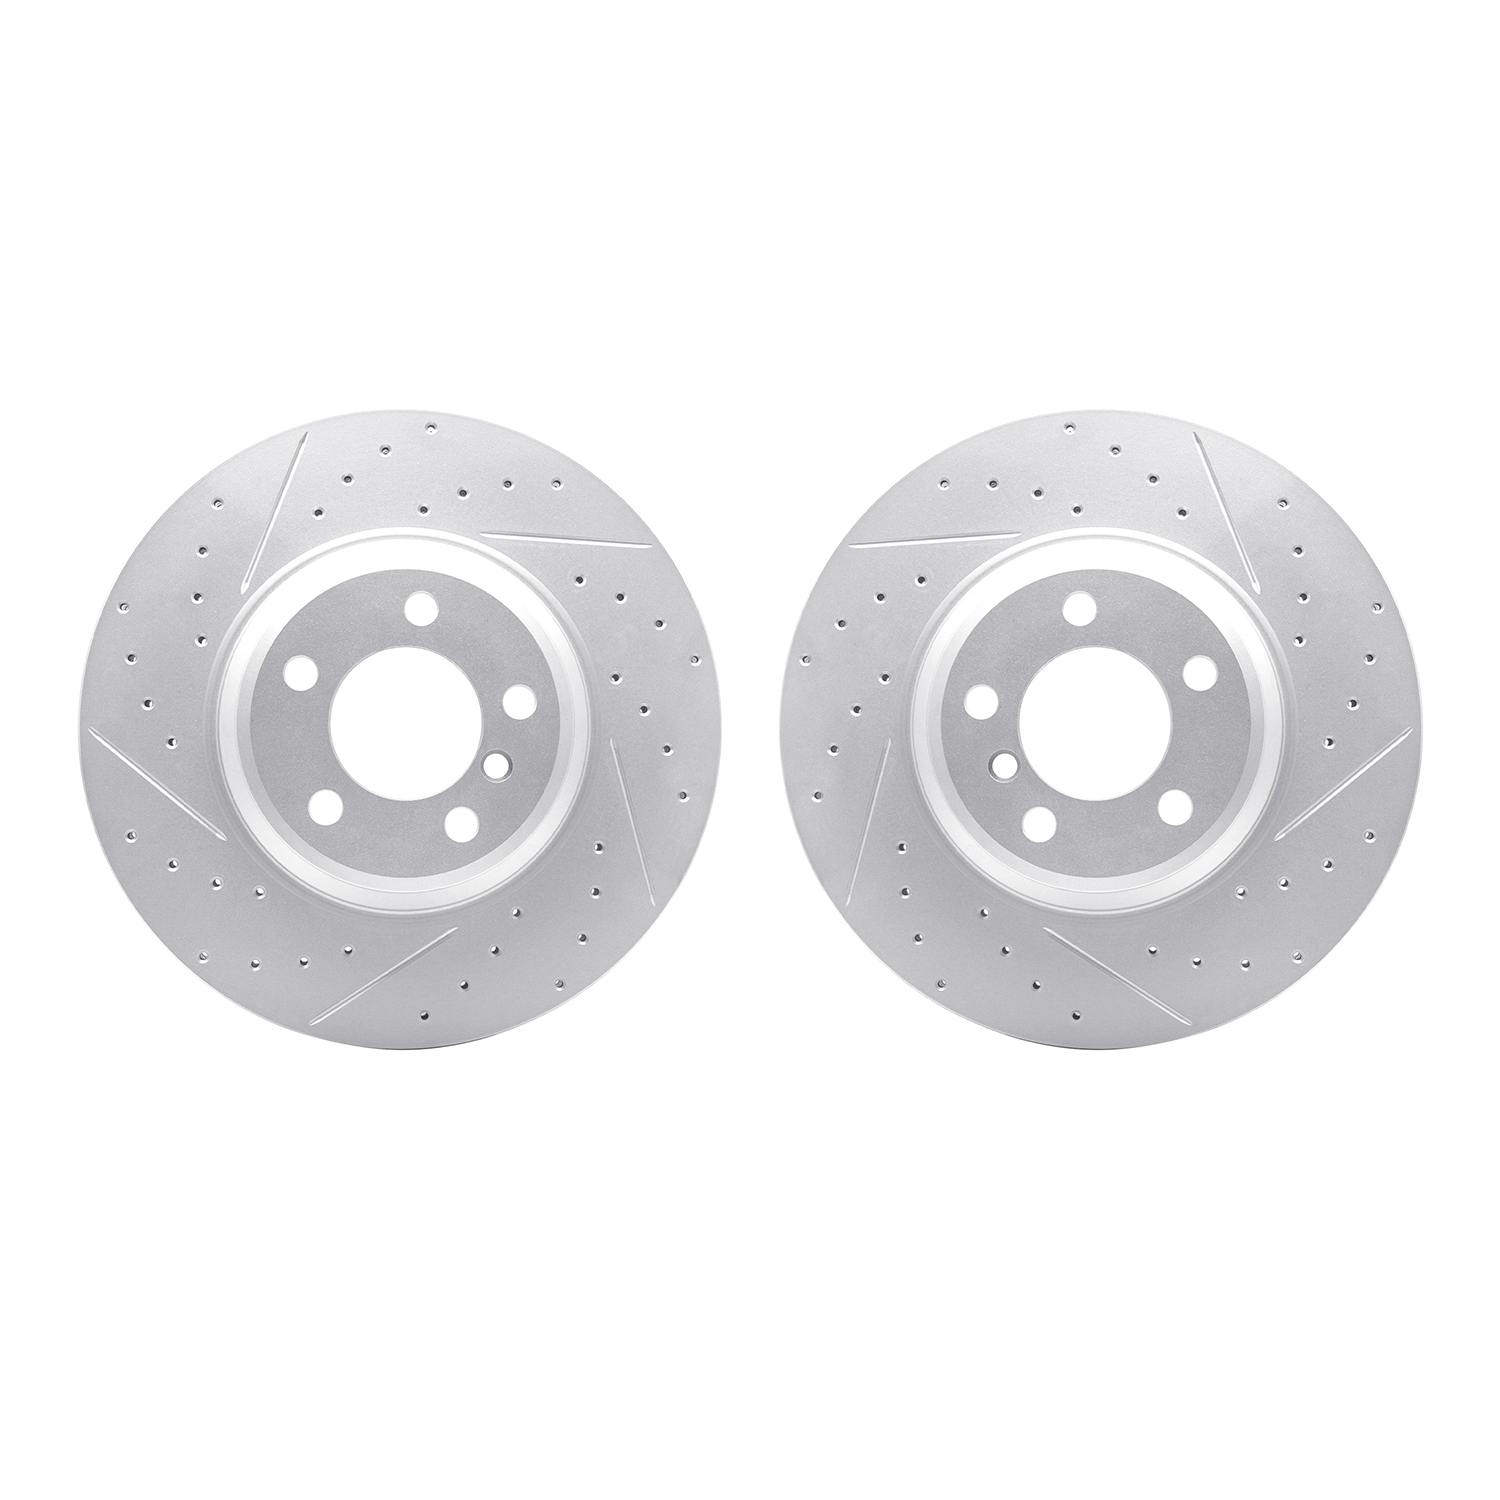 2002-31031 Geoperformance Drilled/Slotted Brake Rotors, 2002-2008 BMW, Position: Front